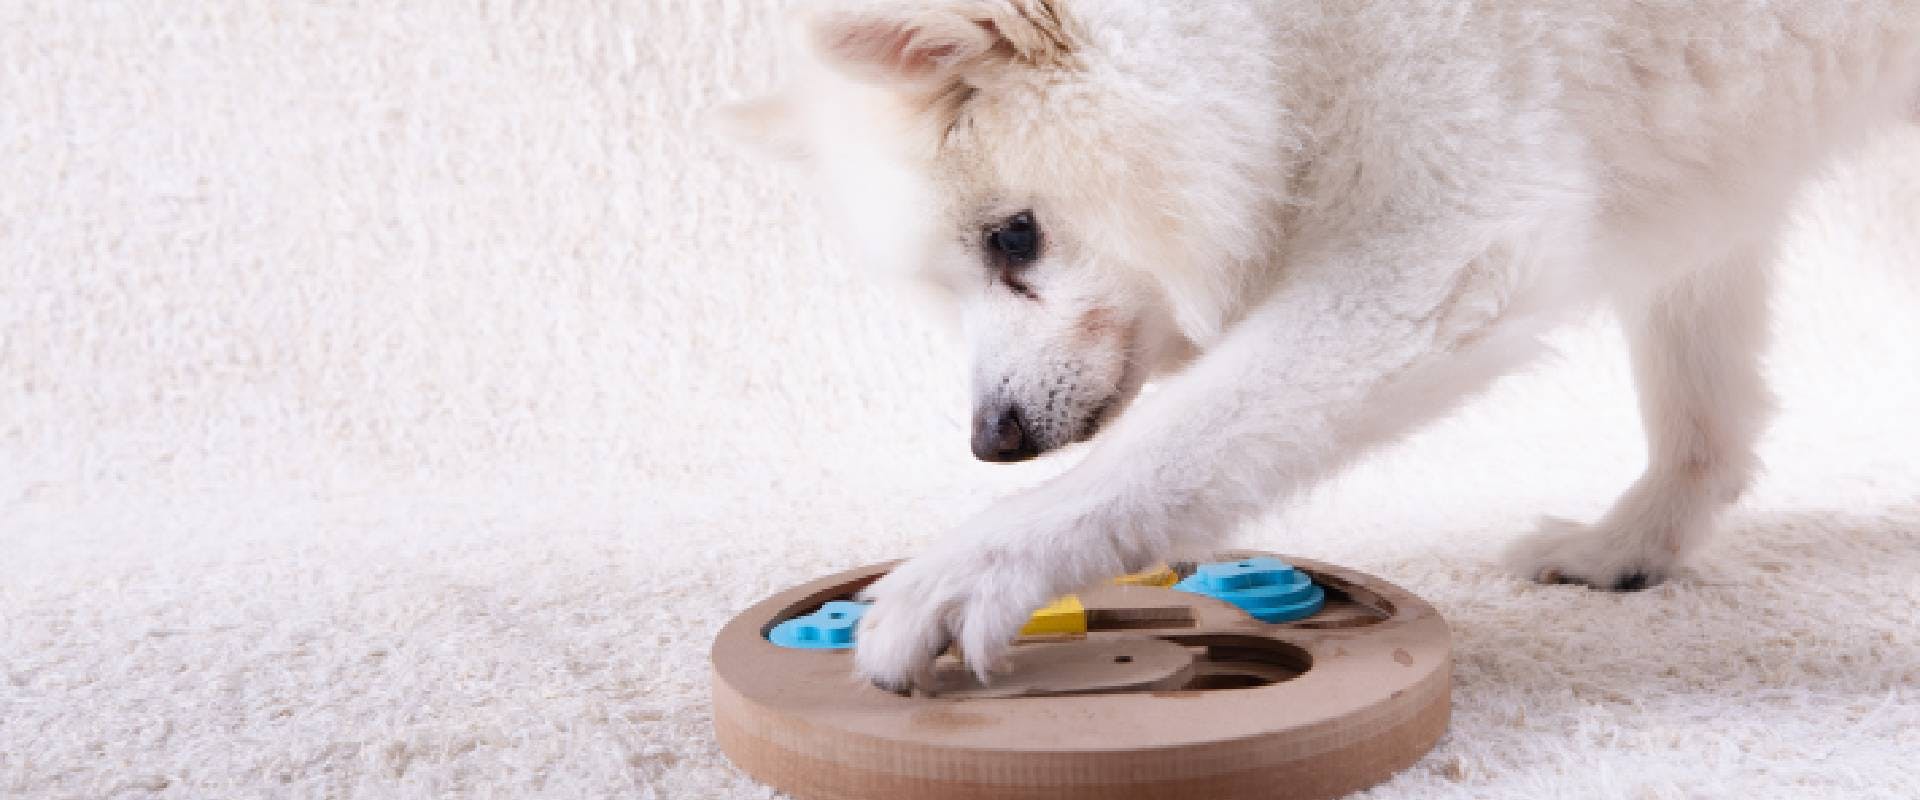 Dog playing with an interactive puzzle toy